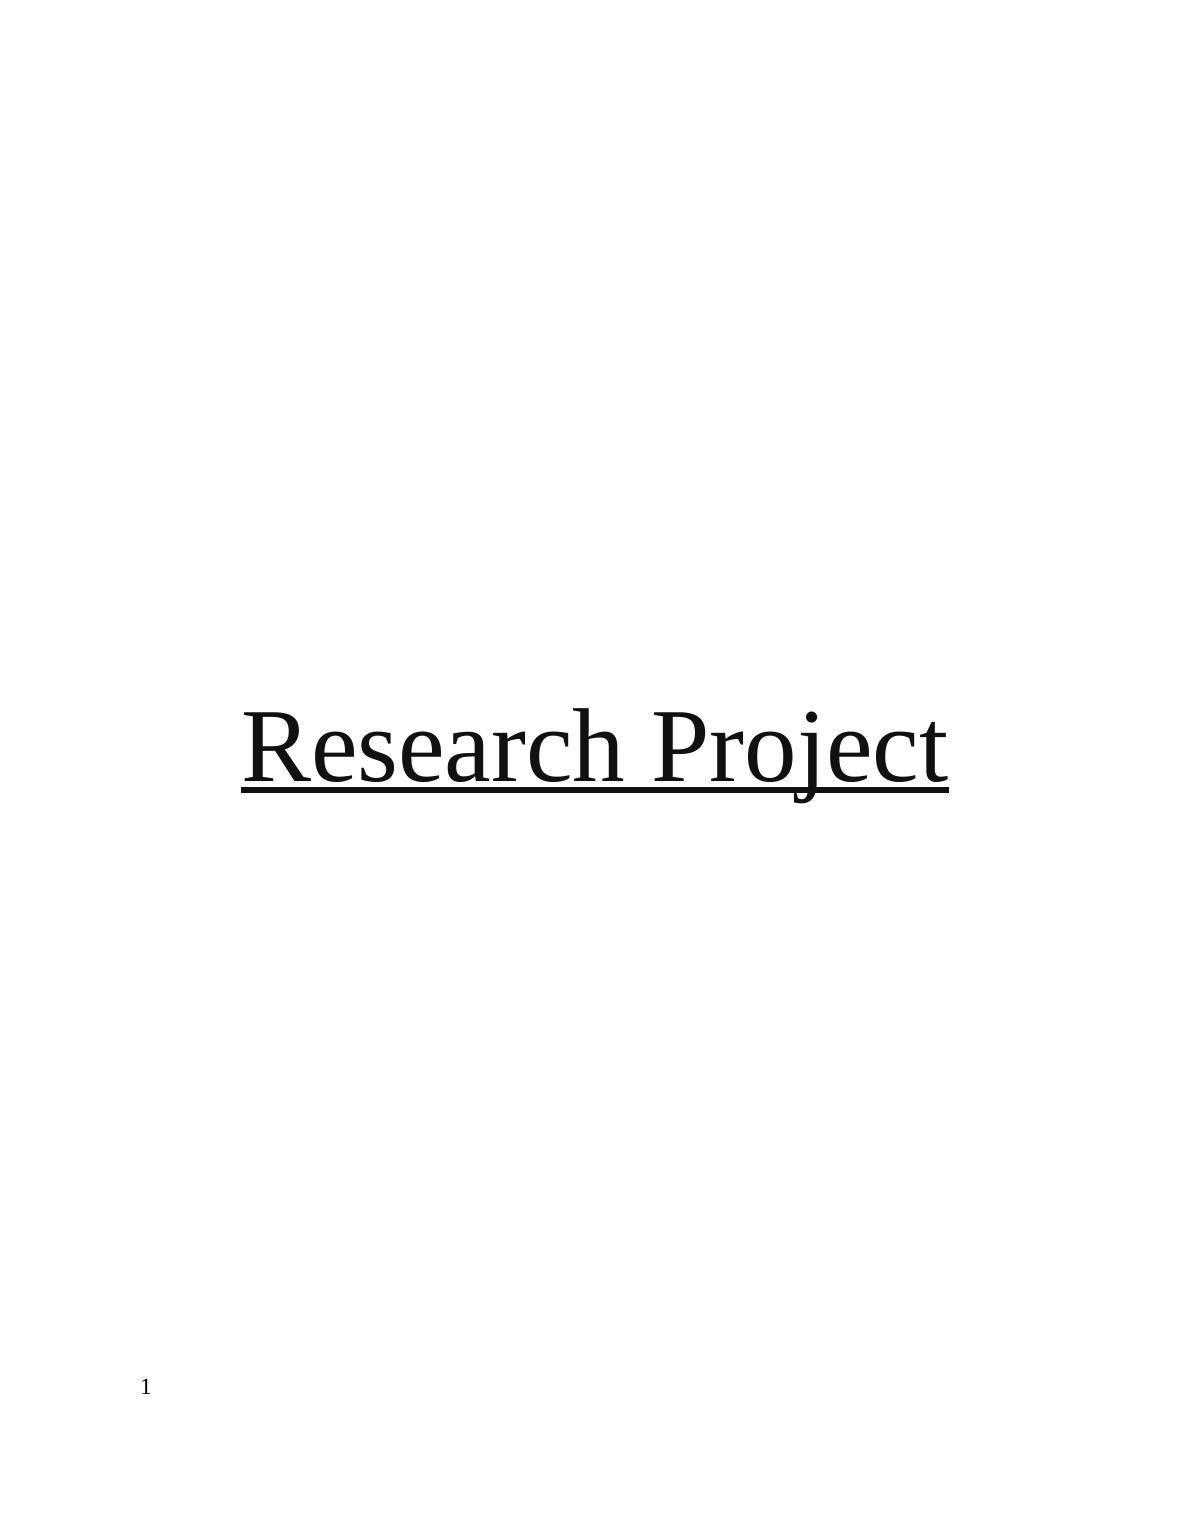 Research Project TASK 11 Research proposal 1 Research proposal outline specification 1 Research project proposal 2 Matching of resources 3 Factors that contribute to process of research project select_1